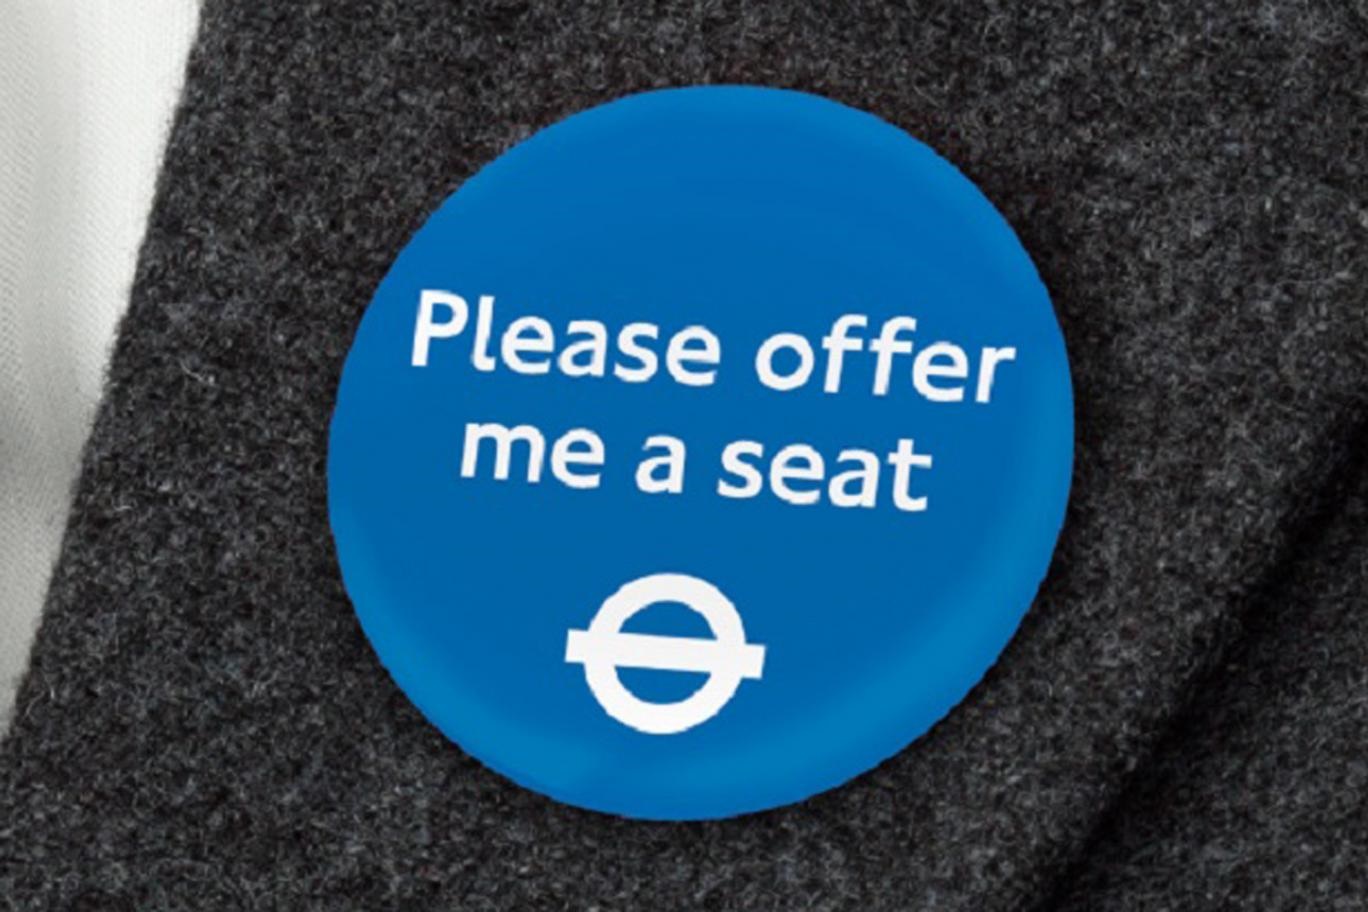 TfL introduces new badges to help disabled passengers find seats